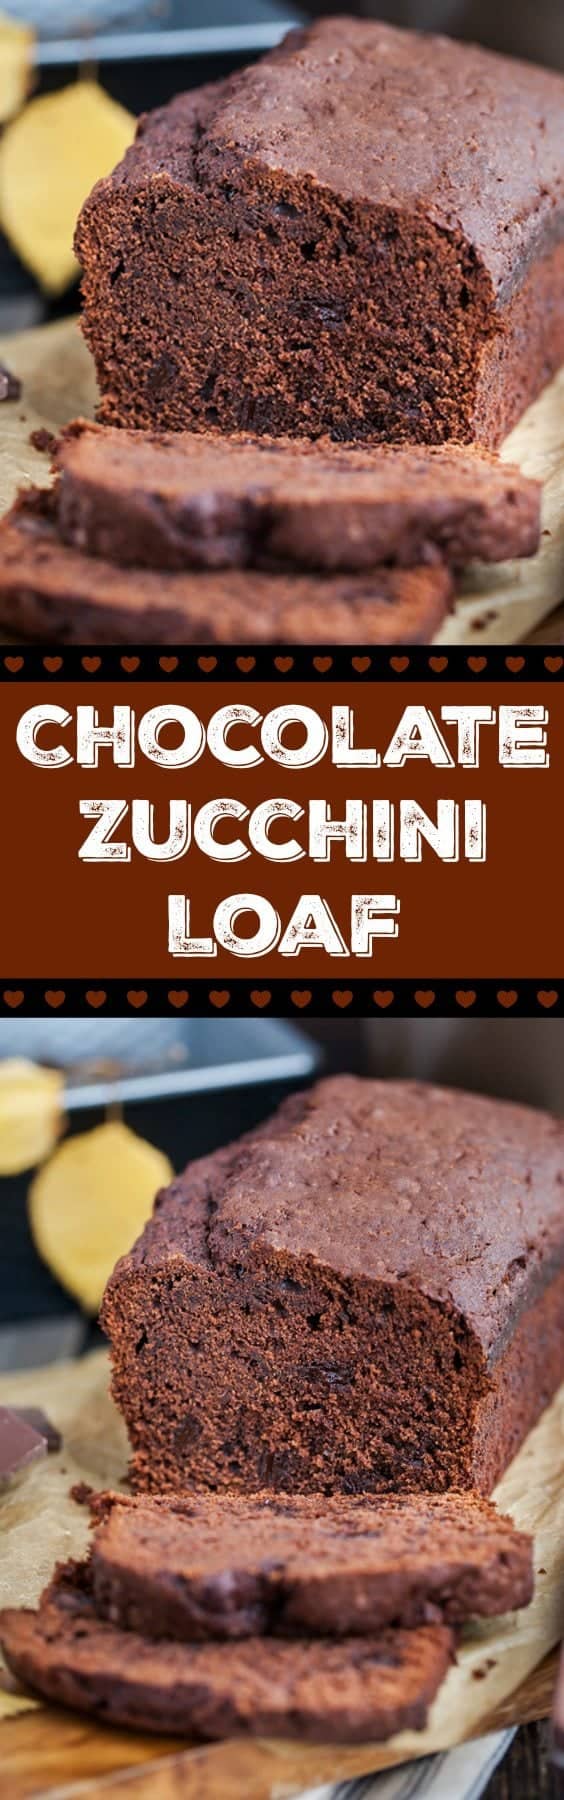 Basic Chocolate Zucchini Bread . Simple, easy and it makes two loaves! #chocolate #zucchini #baking